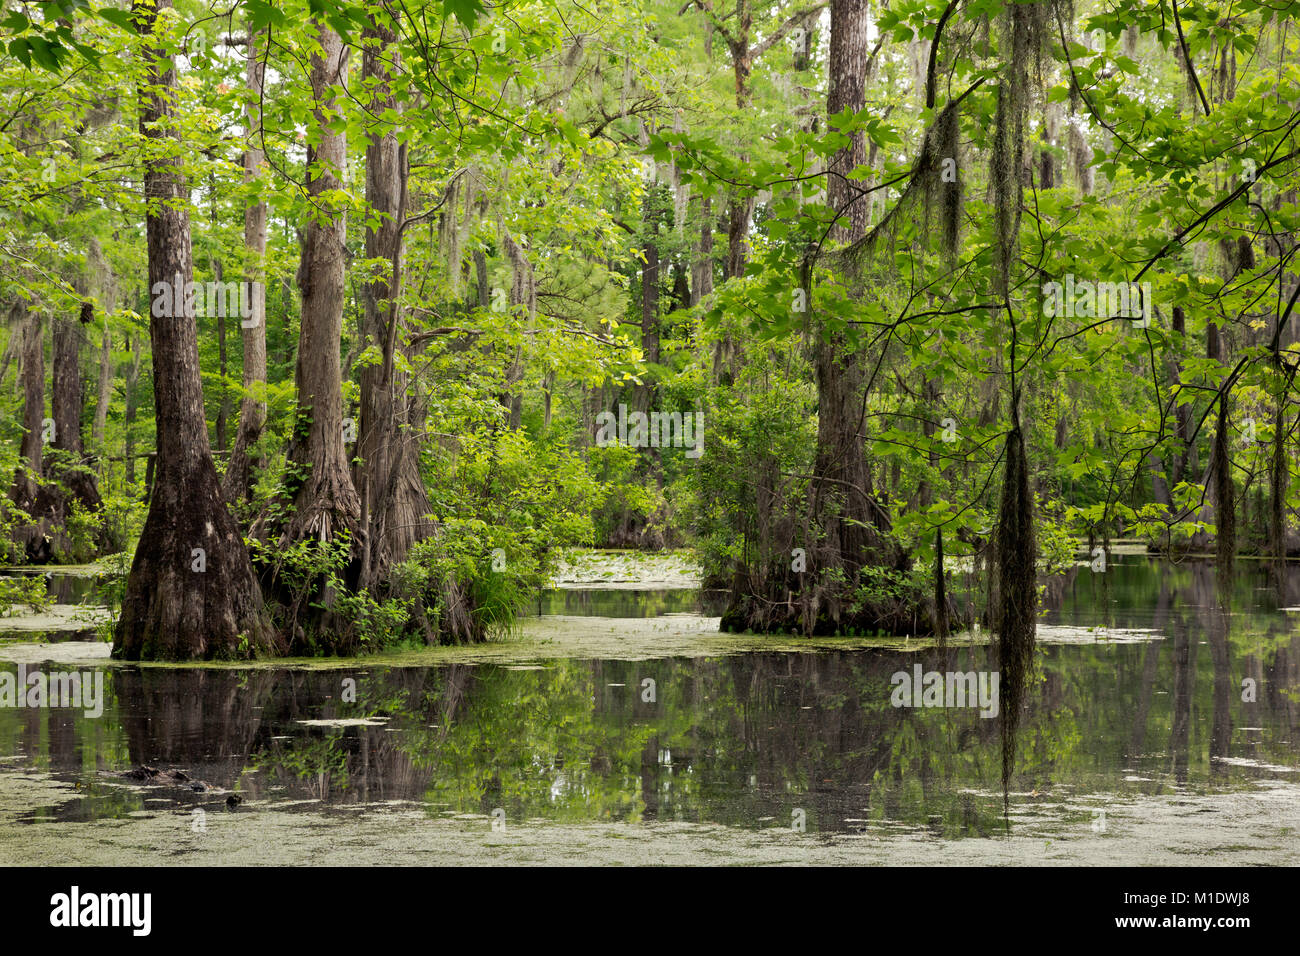 NC01495-00...NORTH CAROLINA - Moss hanging from the trees in the cypress swamp at Merchant Millpond State Park. Stock Photo